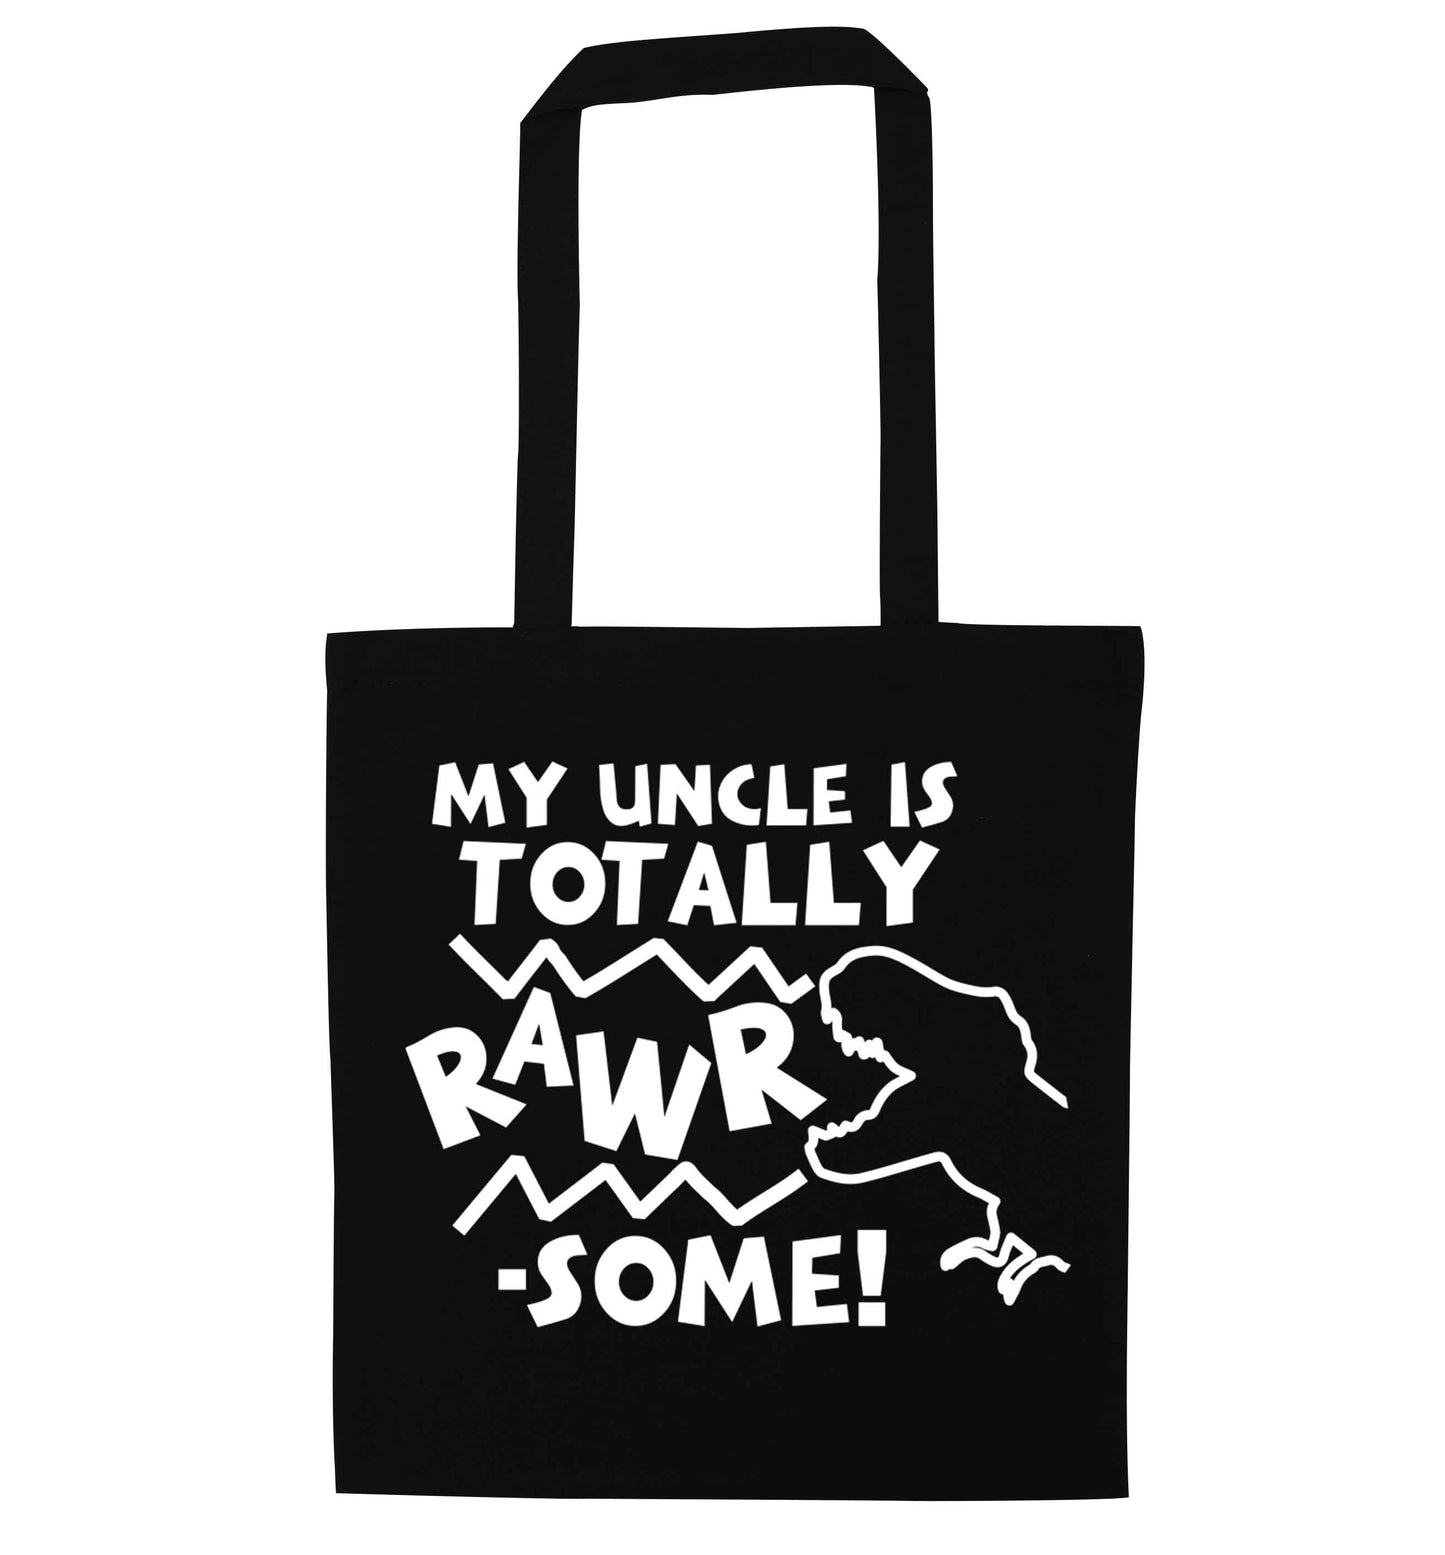 My uncle is totally rawrsome black tote bag